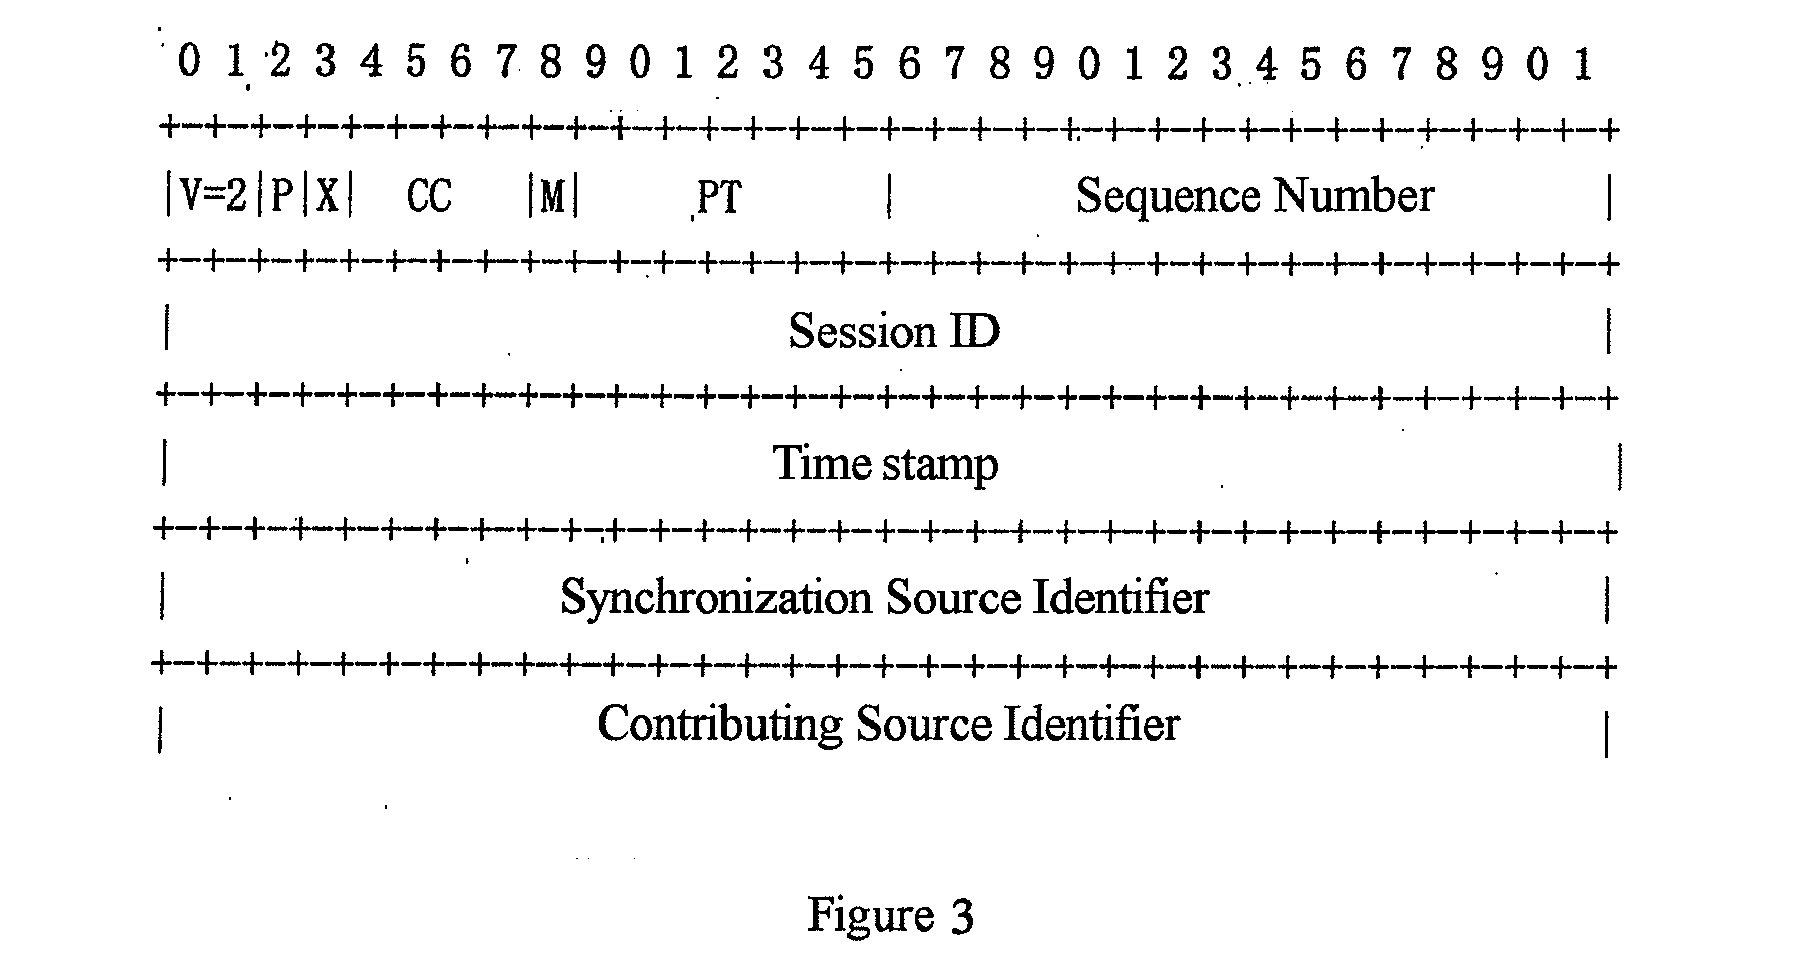 Method for Identifying Real-Time Traffic Hop by Hop in an Internet Network